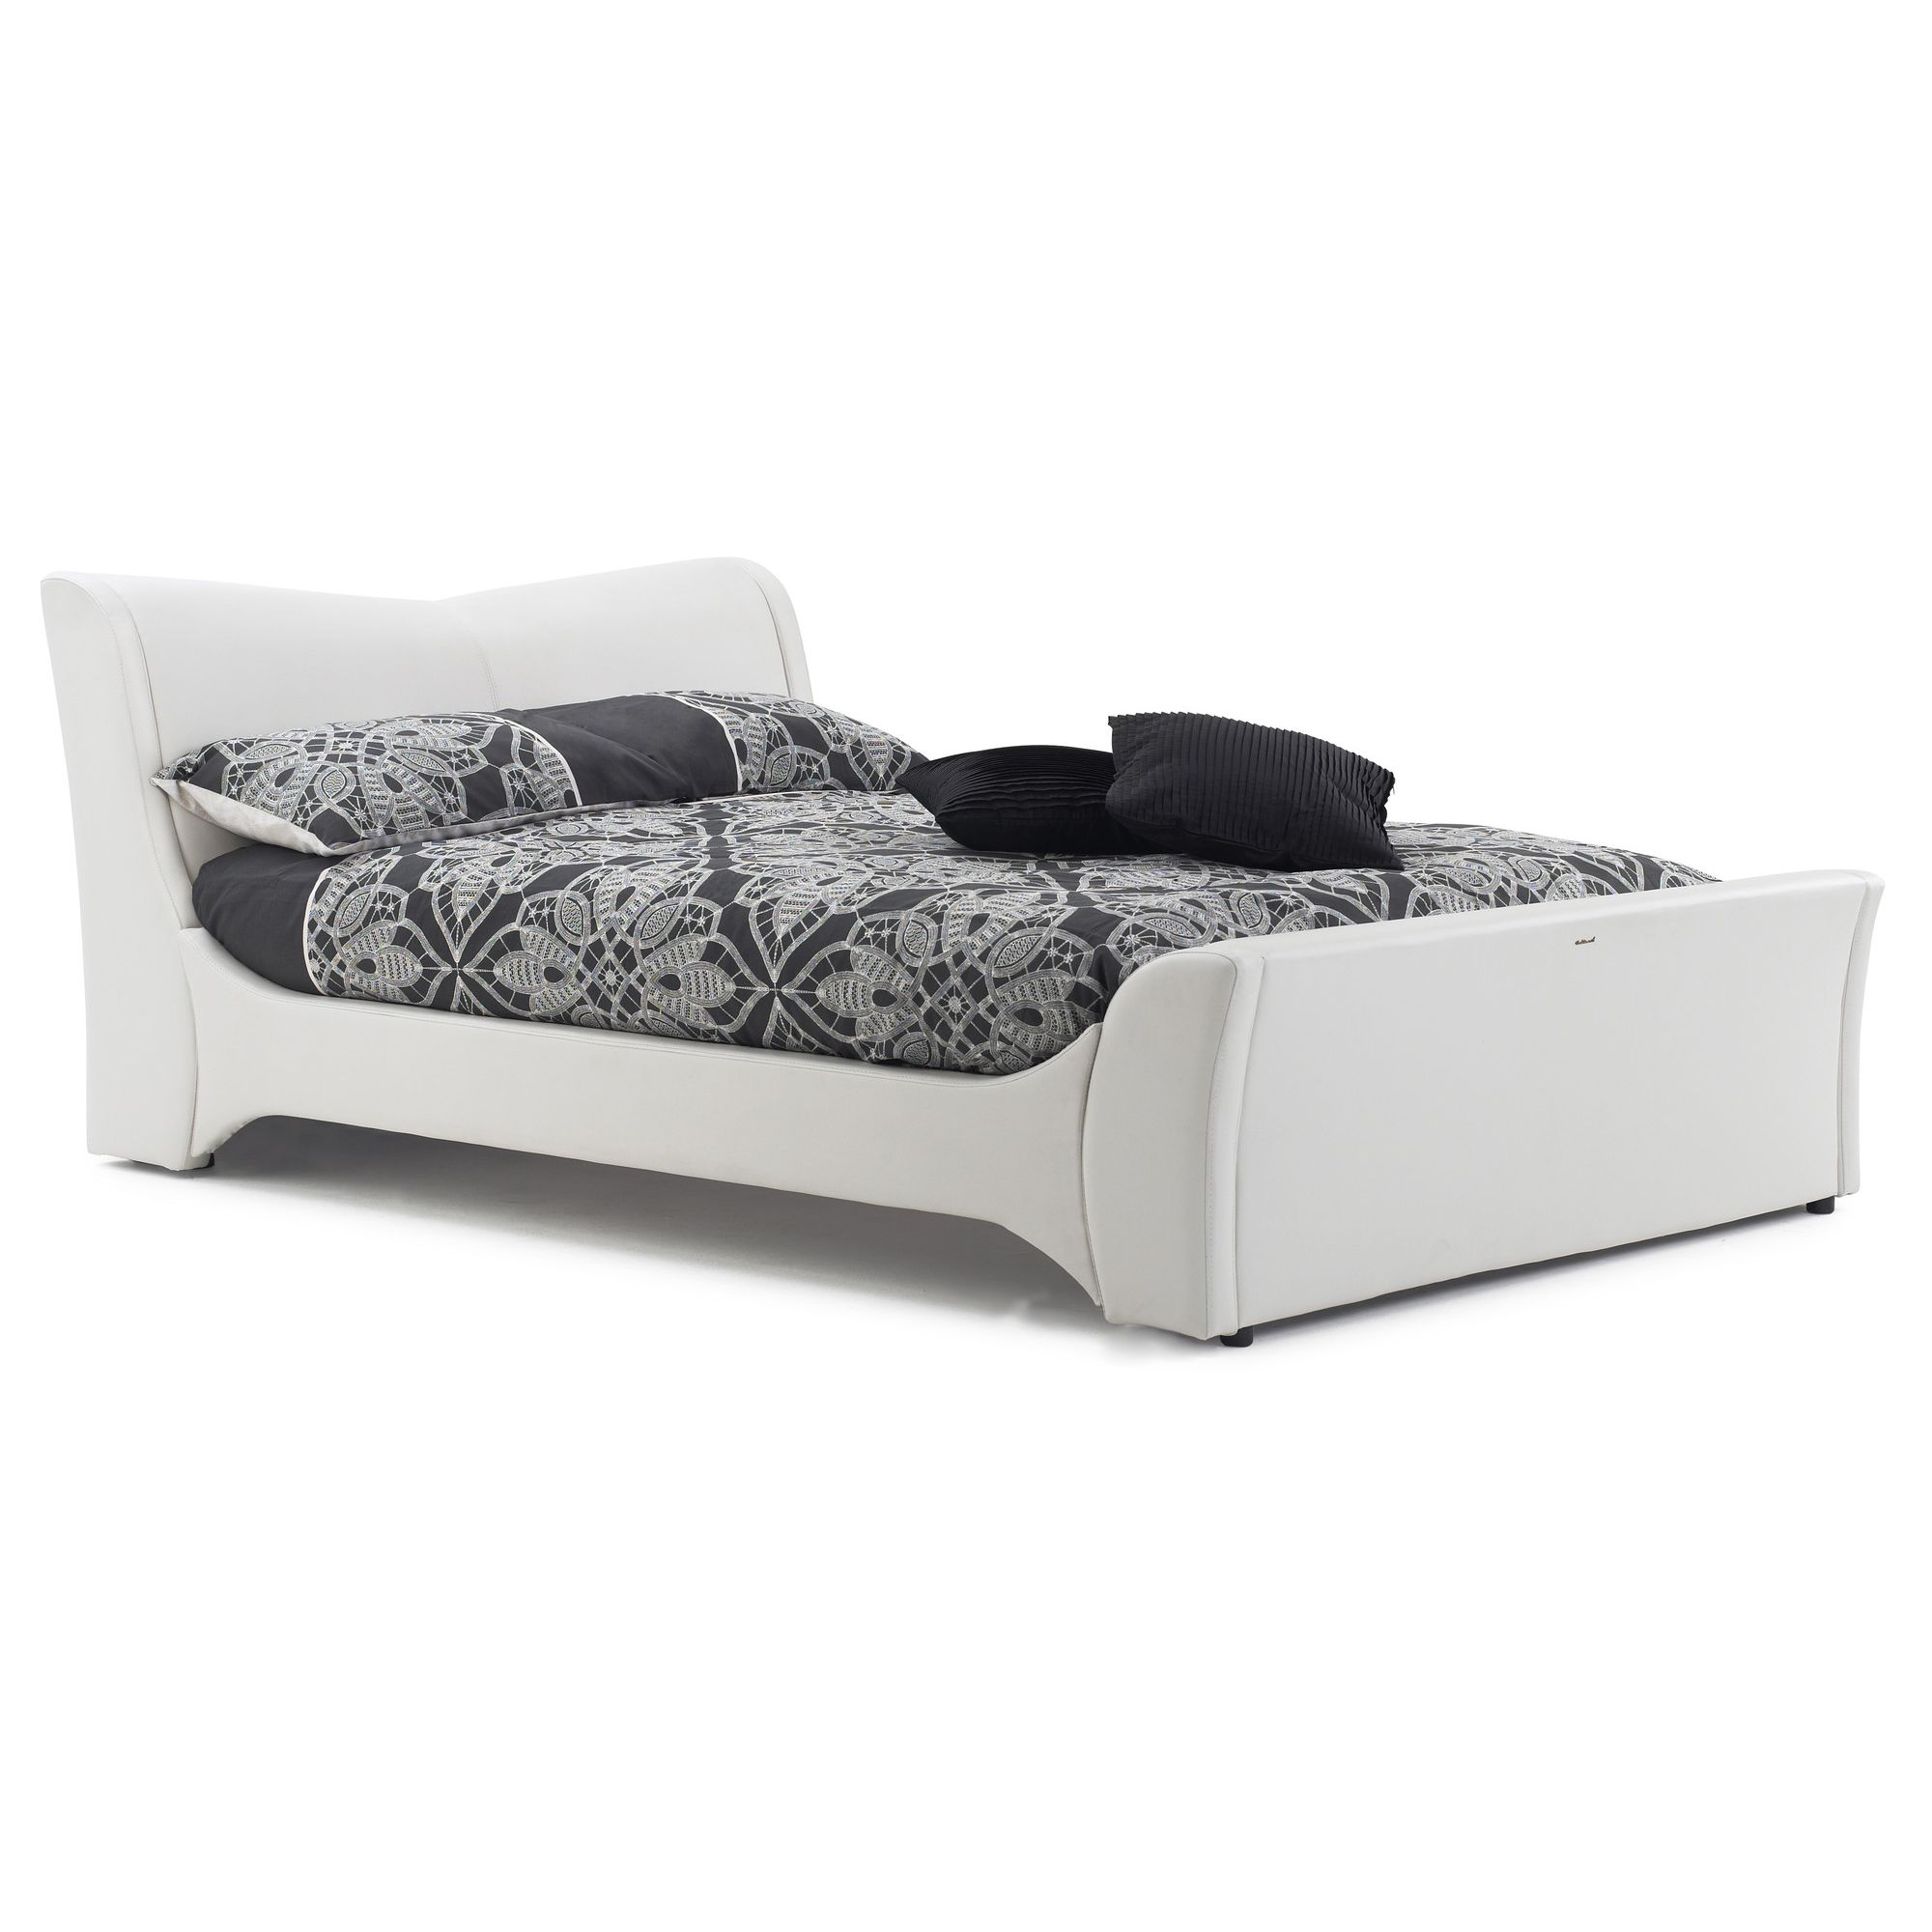 Frank Bosworth Veneto Leather Bed - Double - White at Tescos Direct